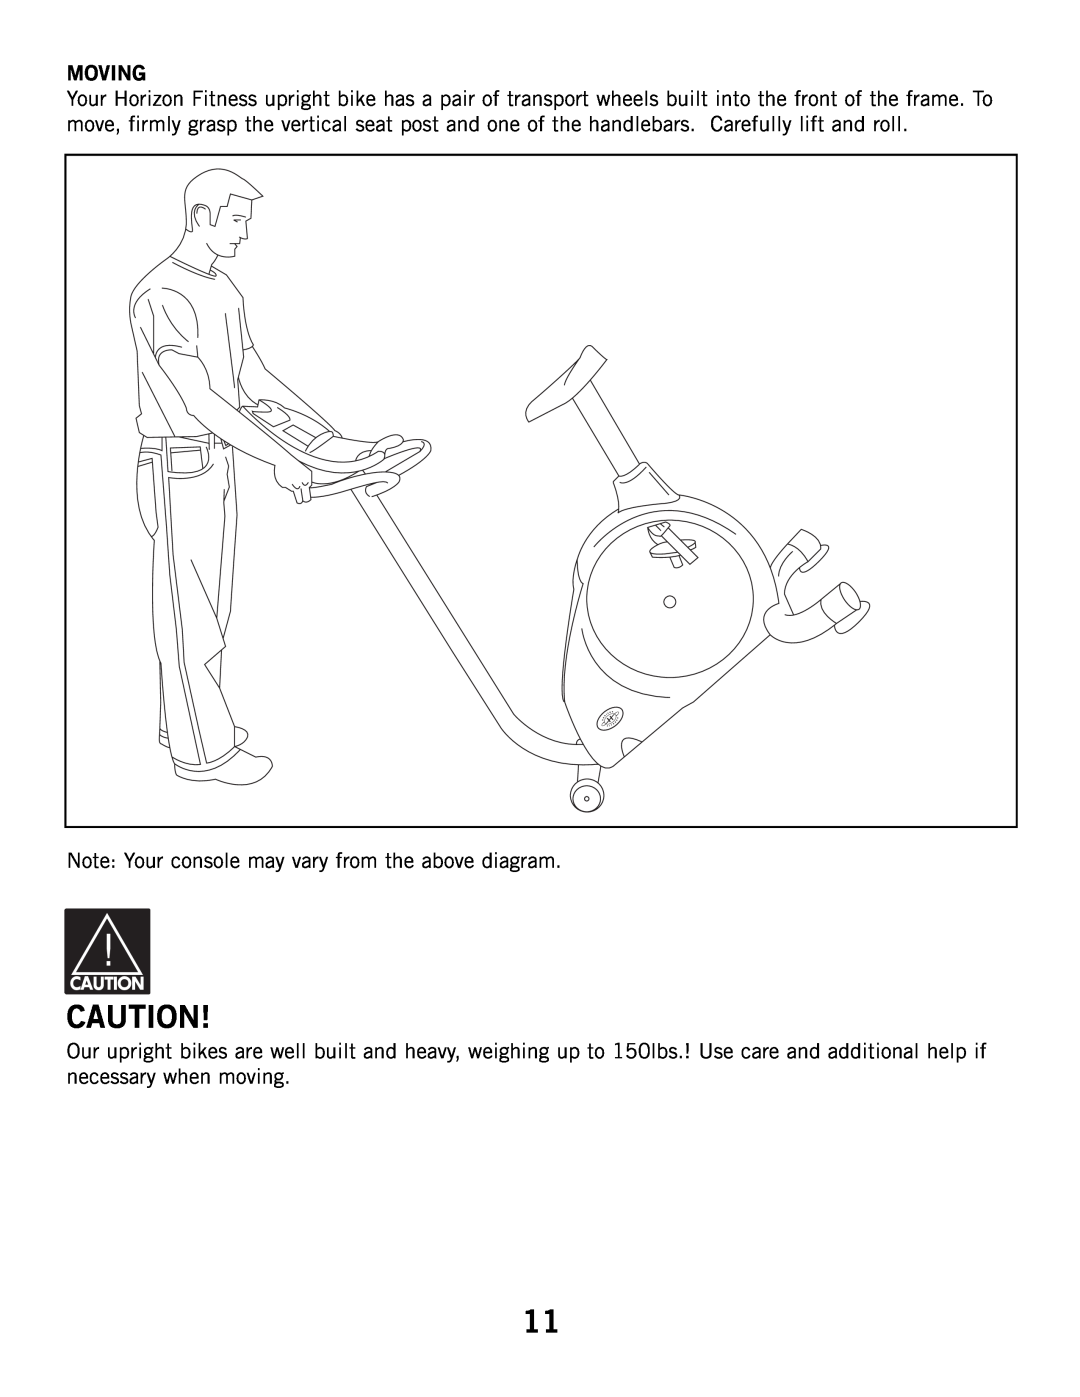 Horizon Fitness 2.1B, 3.1B manual Moving, Note Your console may vary from the above diagram 